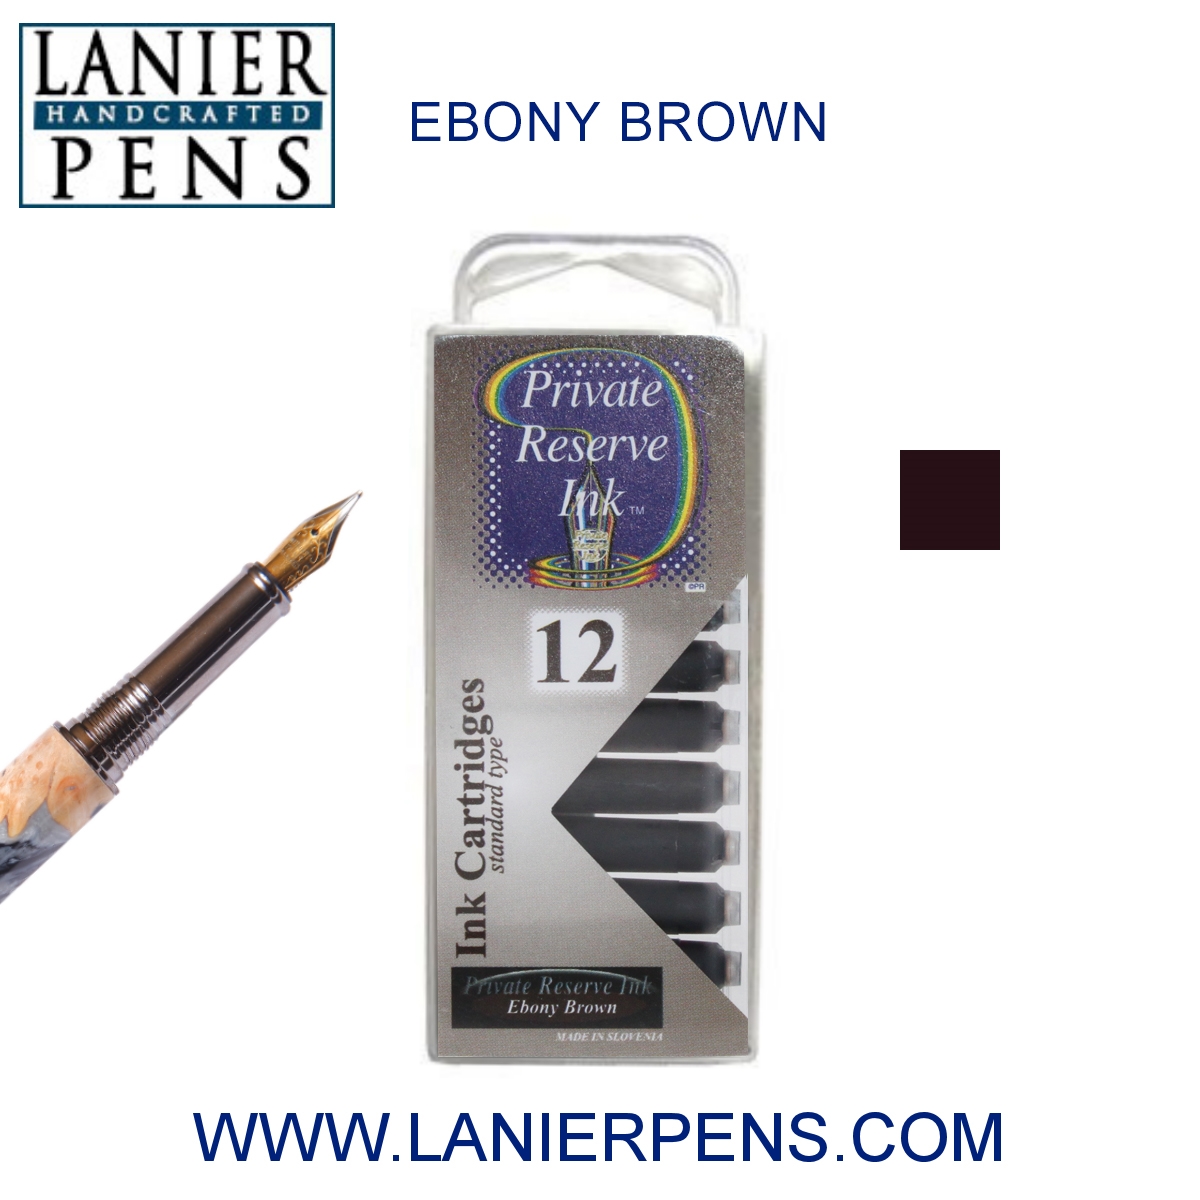 12 Pack - Private Reserve Ink, Universal Fountain Pen Ink Cartridges Clear Case, Ebony Brown by Lanier Pens